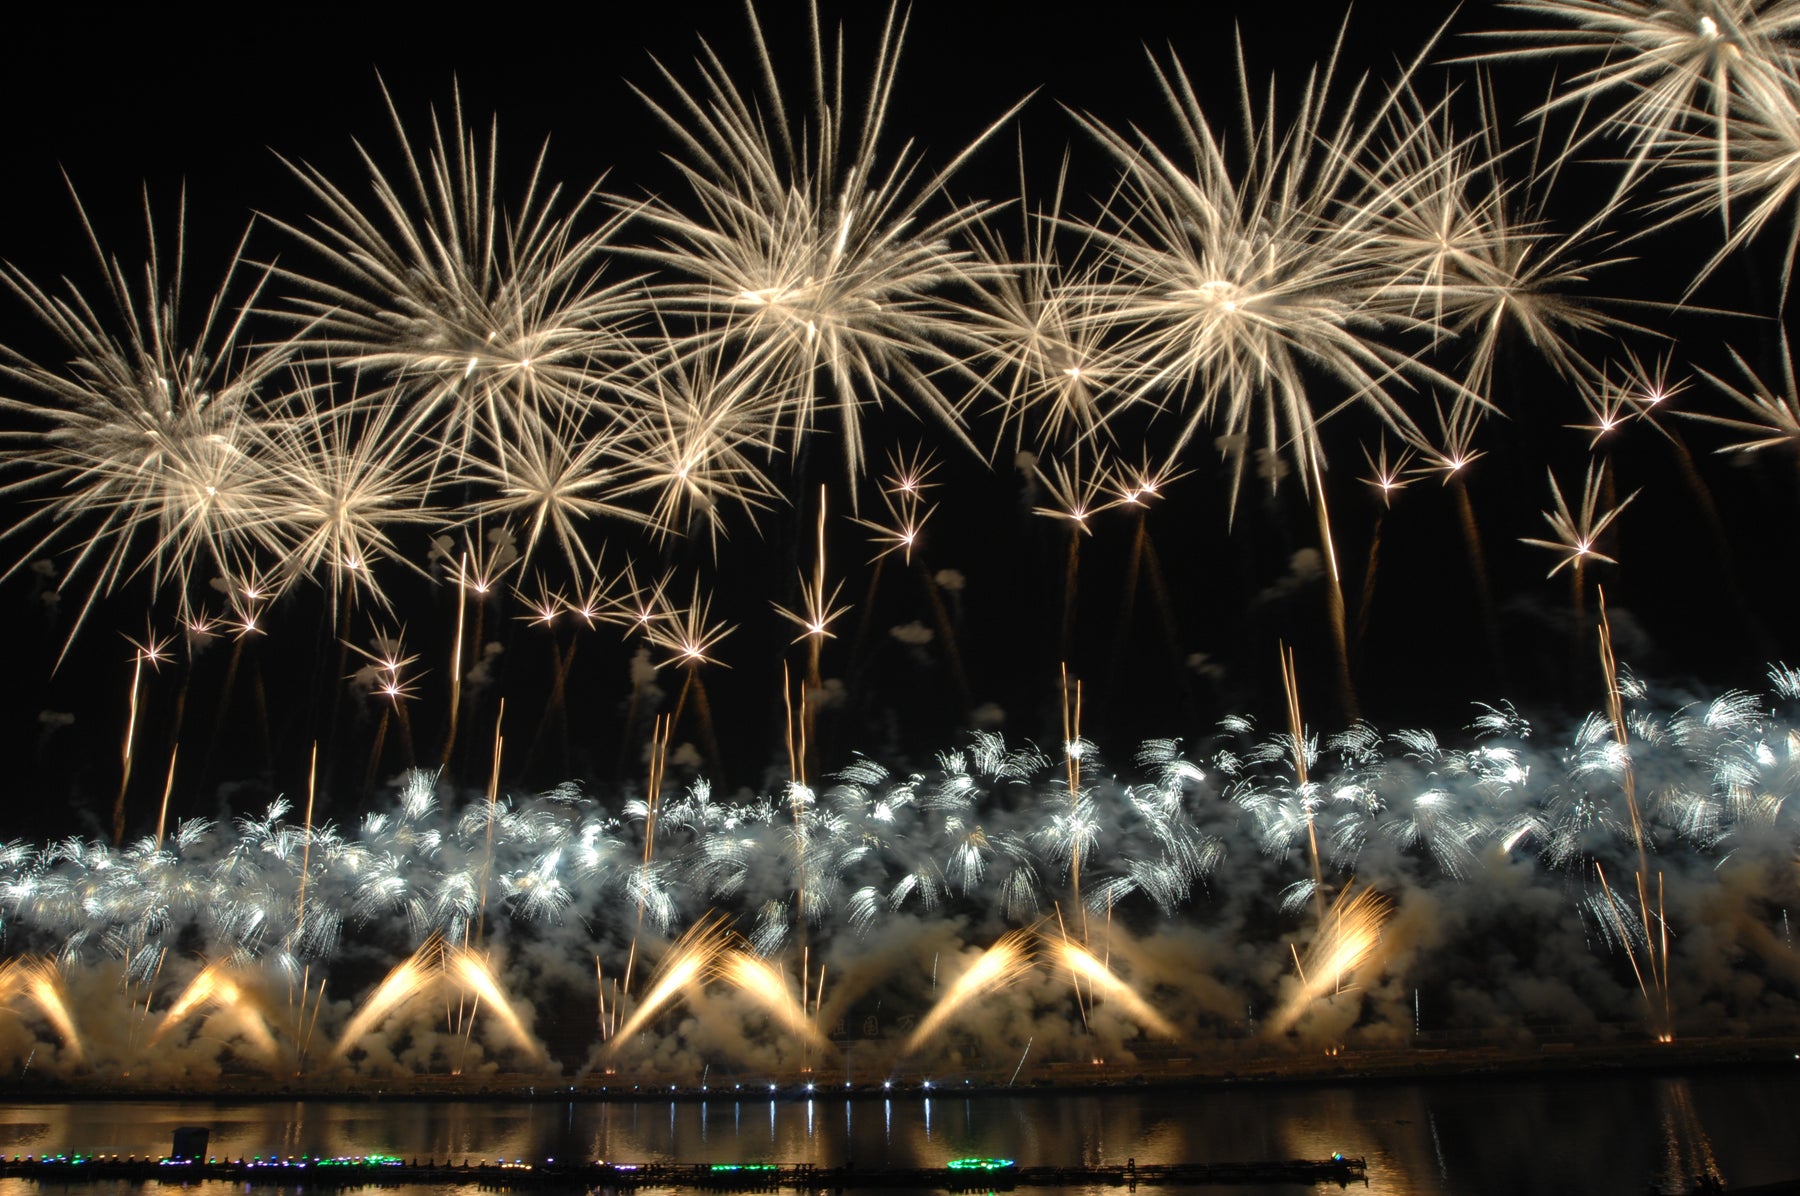 FIREWORKS MARK THE END OF THE 2020 OLYMPICS